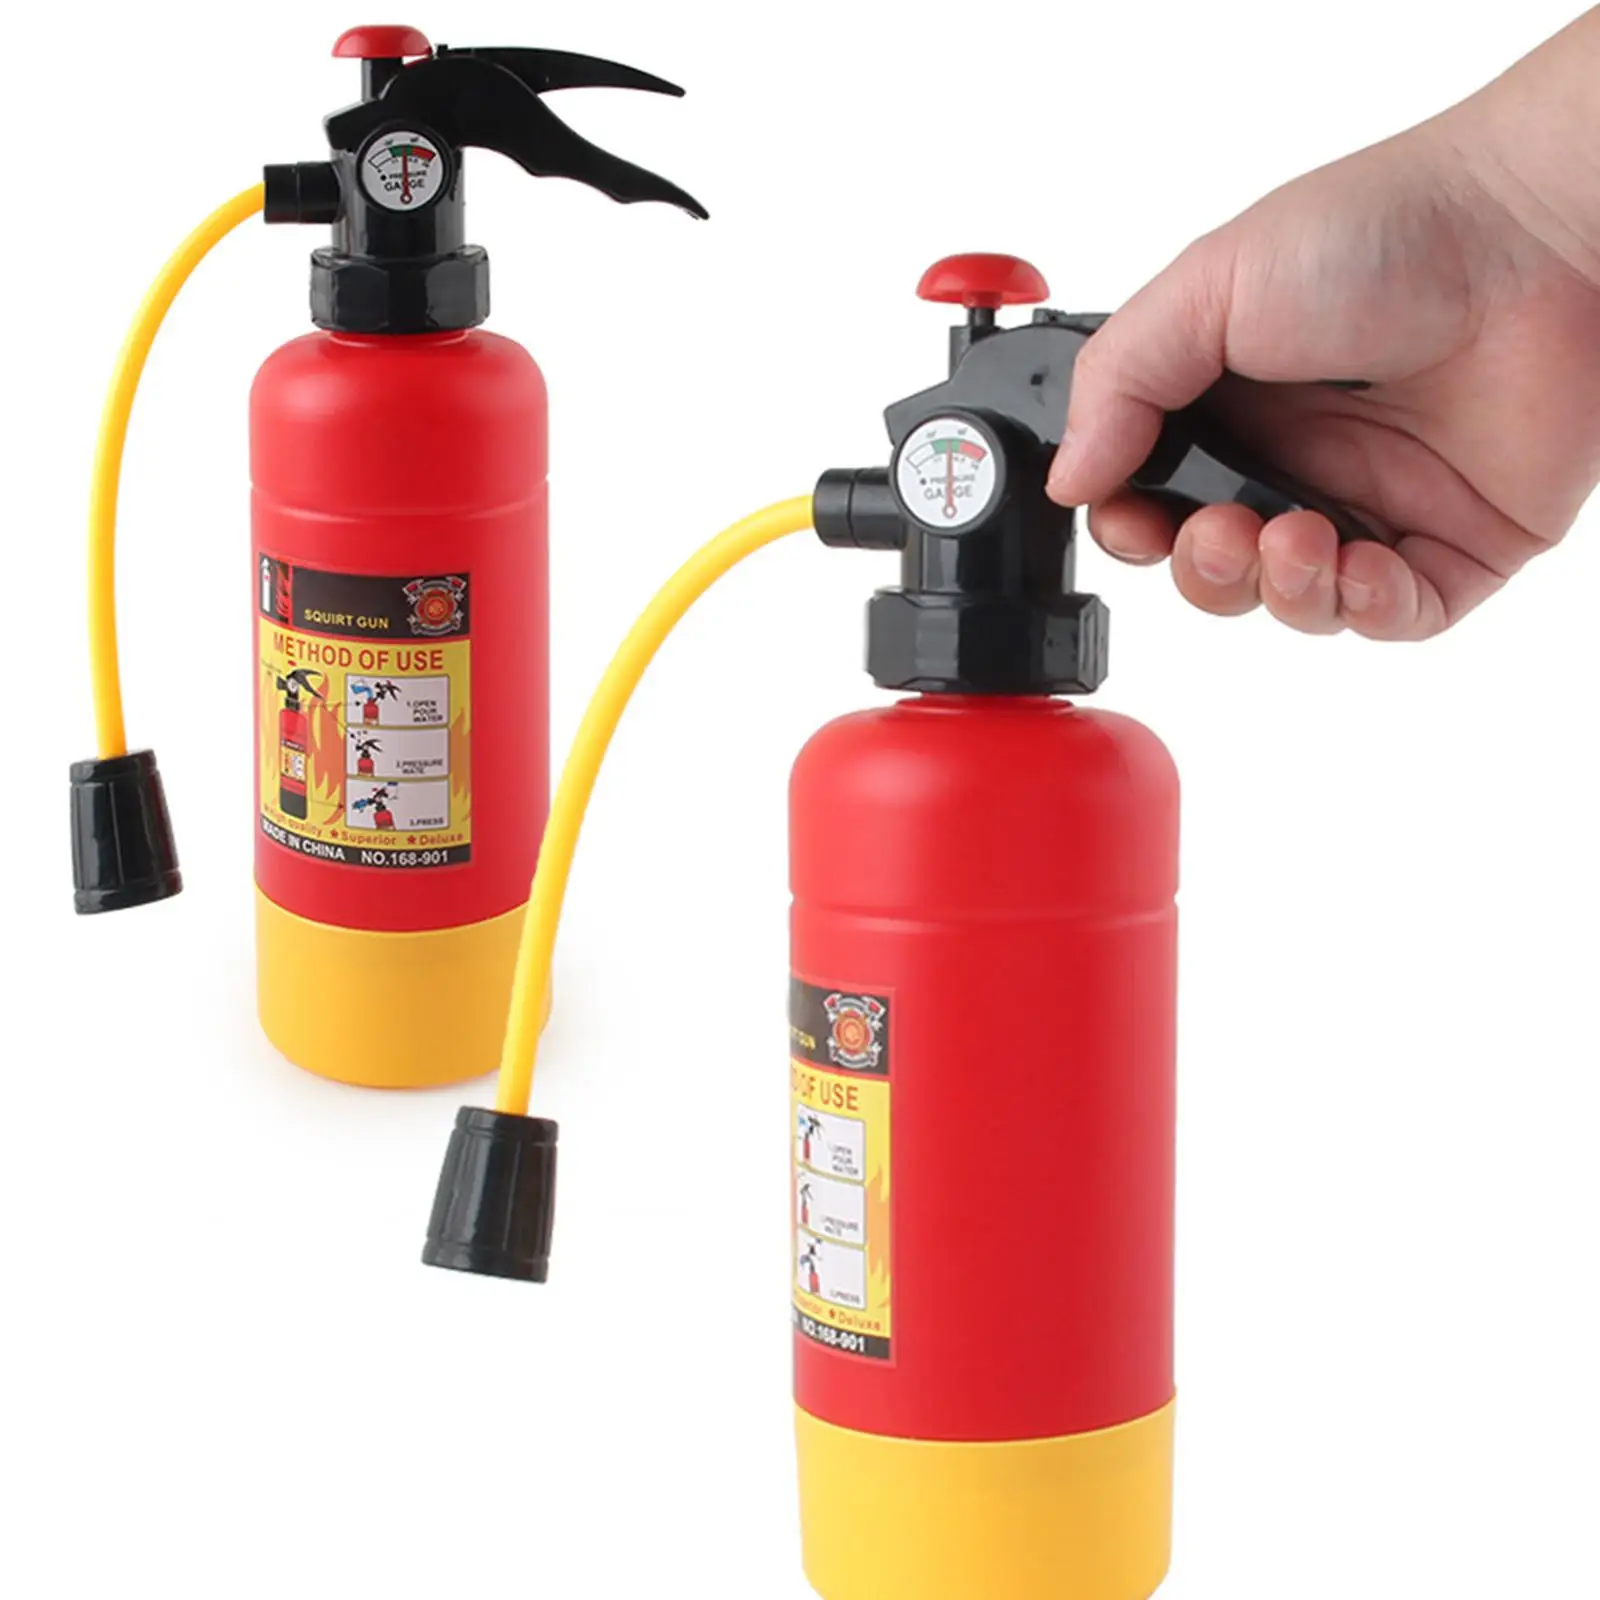 Extinguisher Toy Summer Toys Fireman Squirter for Kids Girl Boys Party Favors Halloween